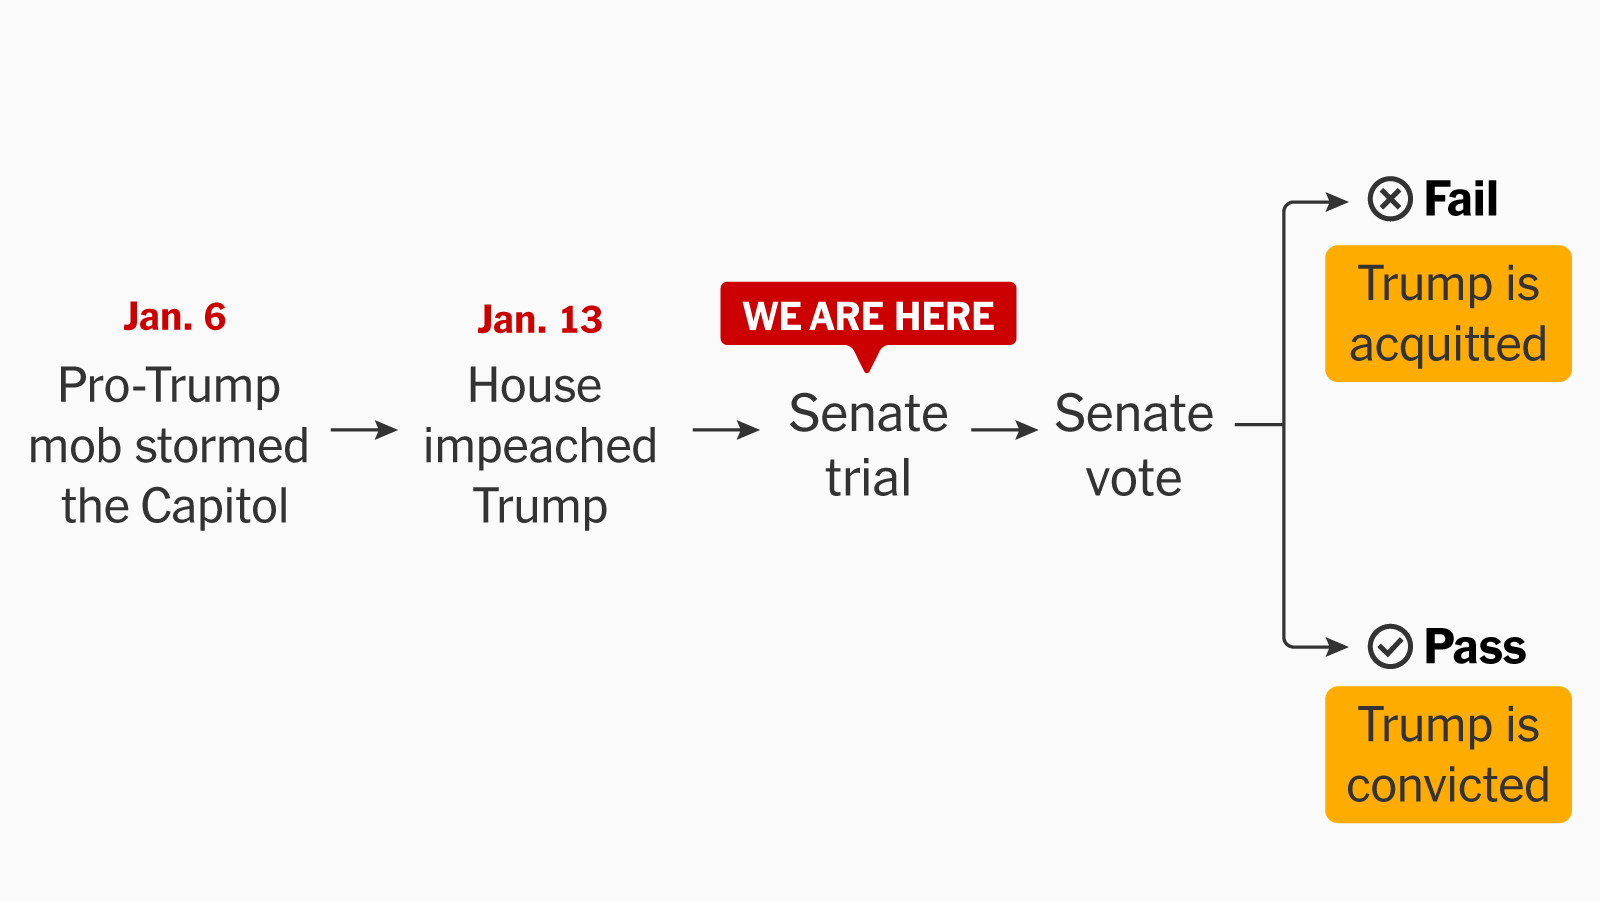 What is trumps odds of being impeached now